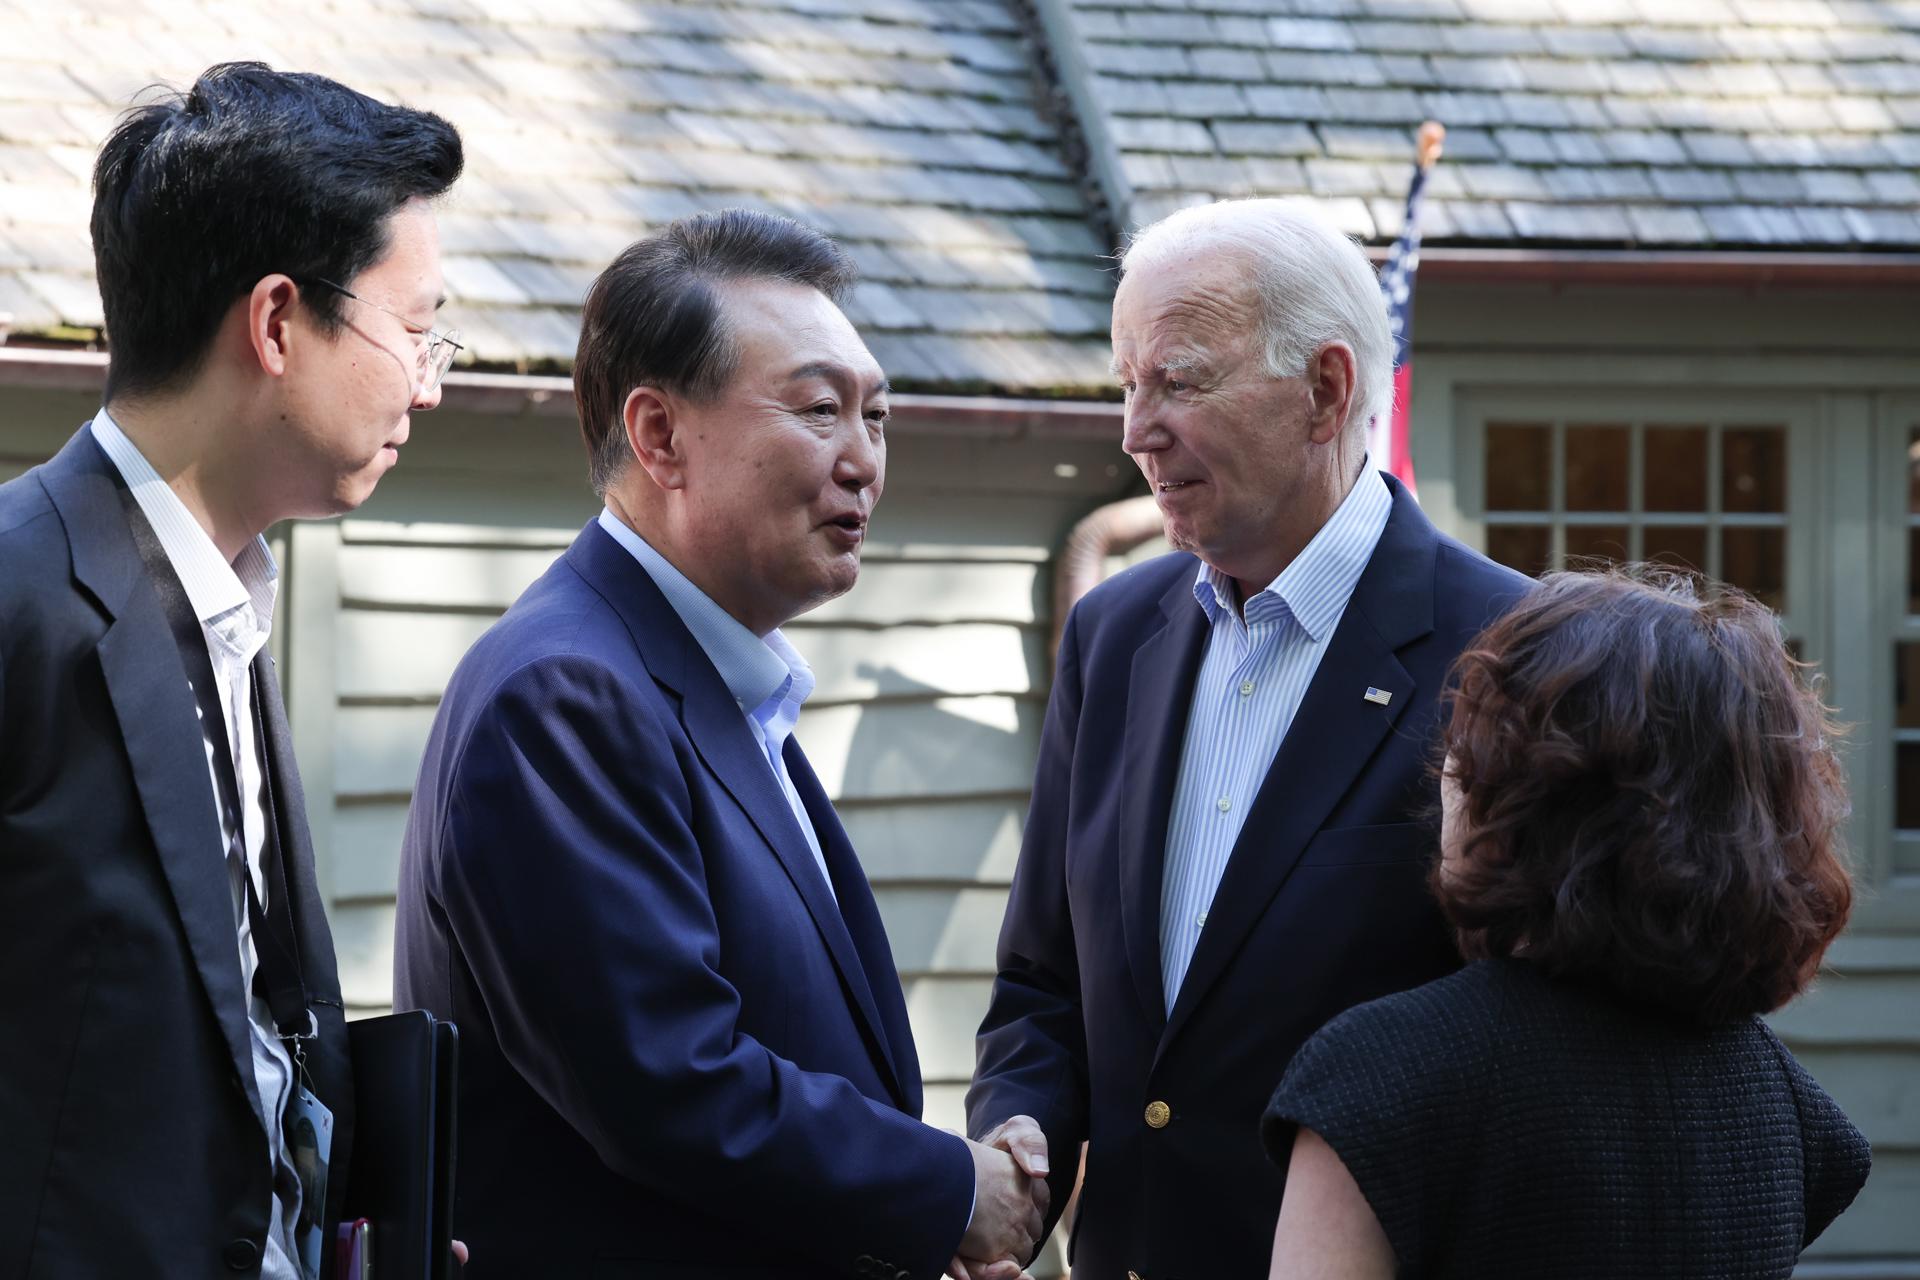 South Korean President Yoon Suk Yeol (2-L) says goodbye to U.S. President Joe Biden (2-R) before he returns to South Korea after a trilateral summit meeting also with Japanese Prime Minister Fumio Kishida at the Camp David presidential retreat in Maryland, USA, 18 August 2023. EFE/EPA/YONHAP SOUTH KOREA OUT